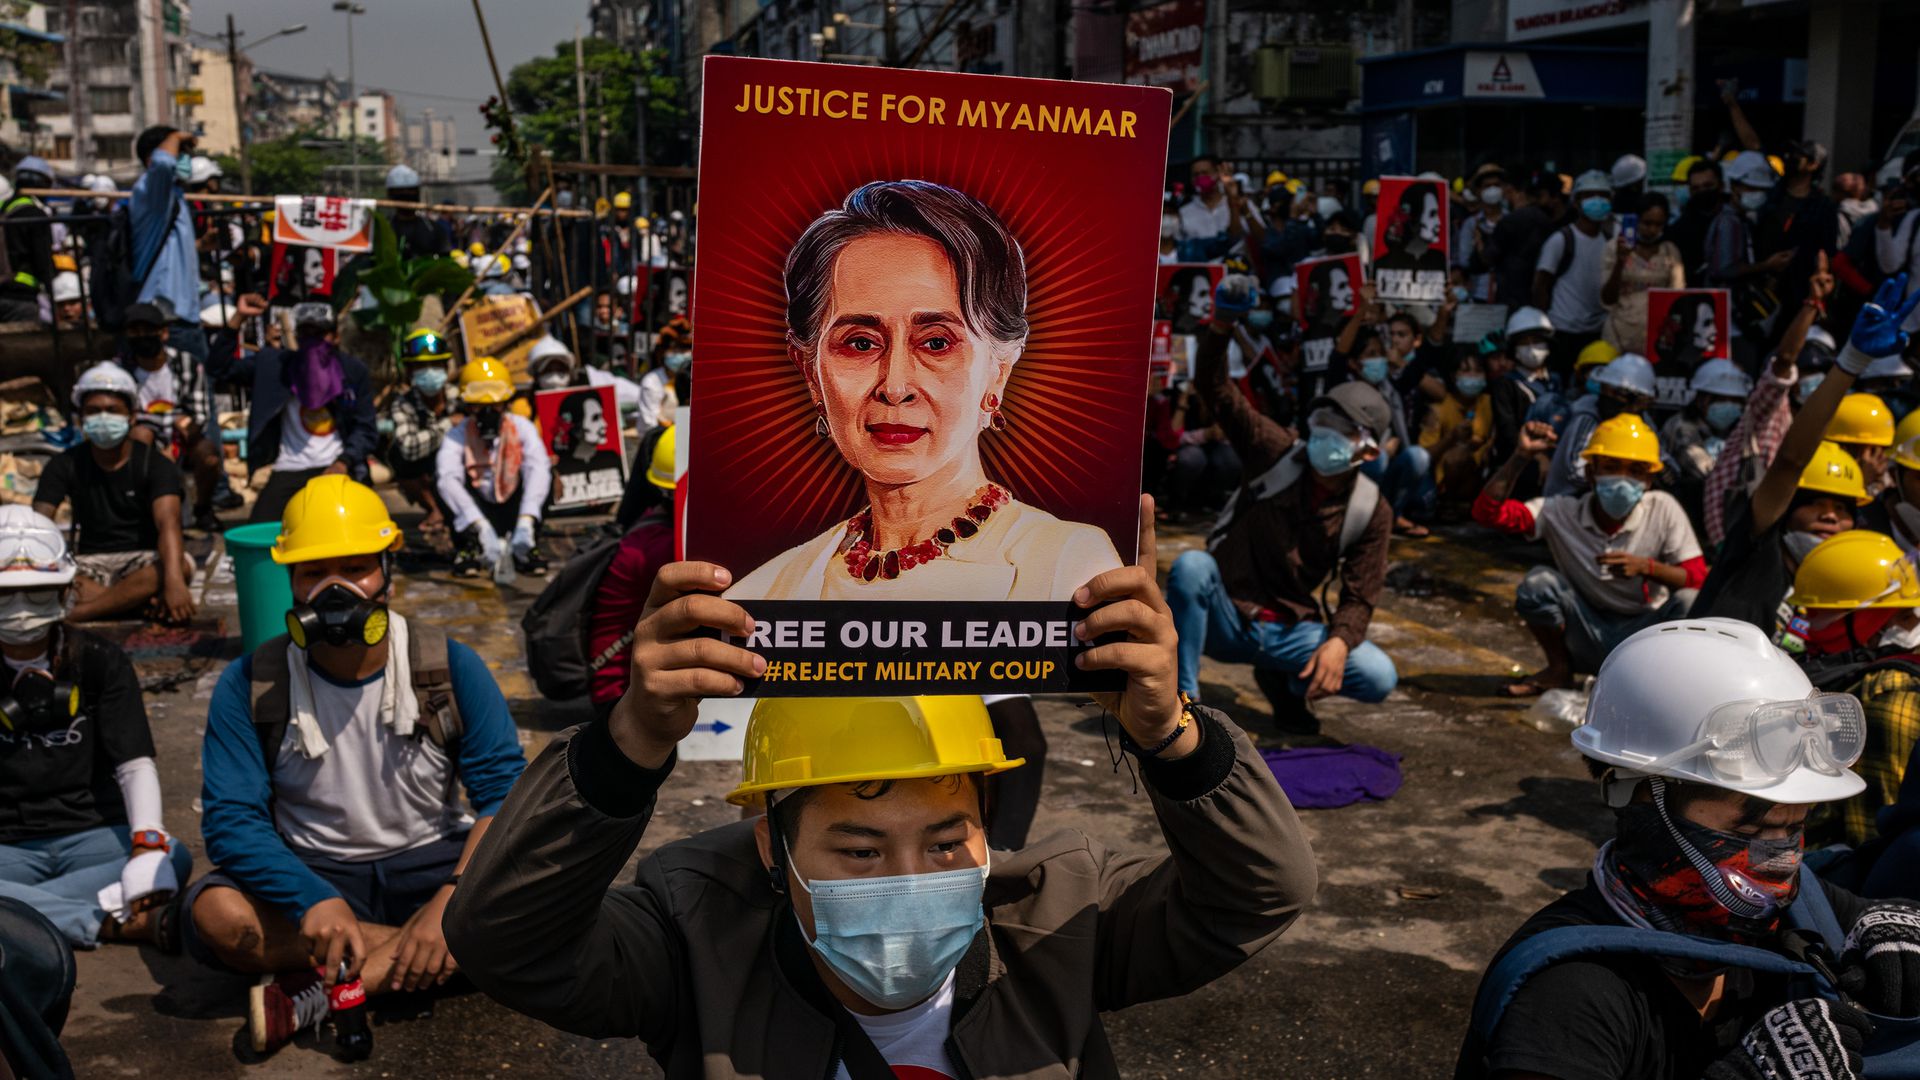 Suu Kyi sentenced to 4 years in jail for 'inciting public unrest'